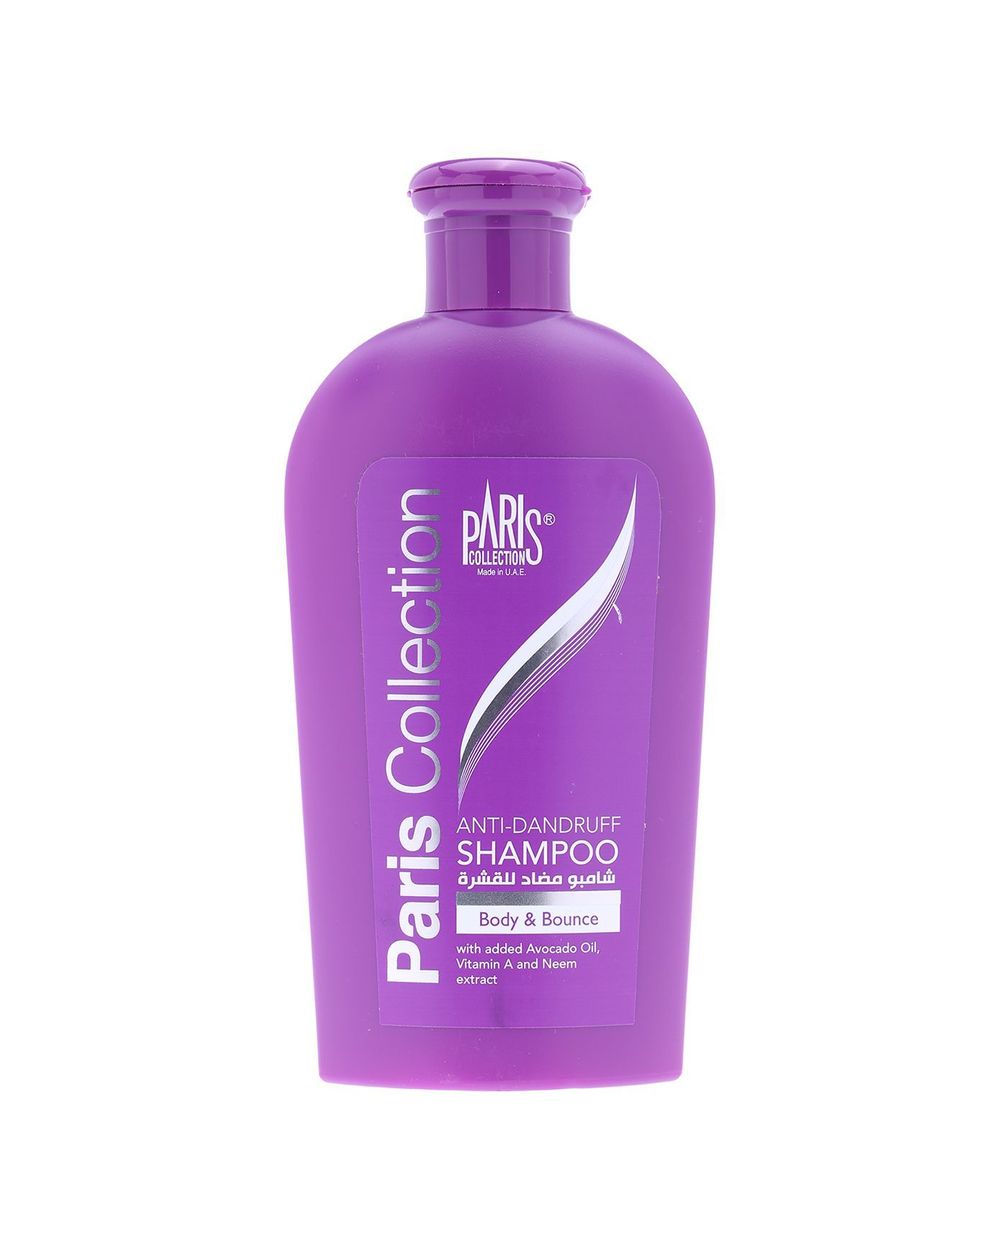 Paris Collection Body Bounce Shampoo (400ml) | Buy Hair & Beauty Care online | Best price and offers | KSA | HNAK.com